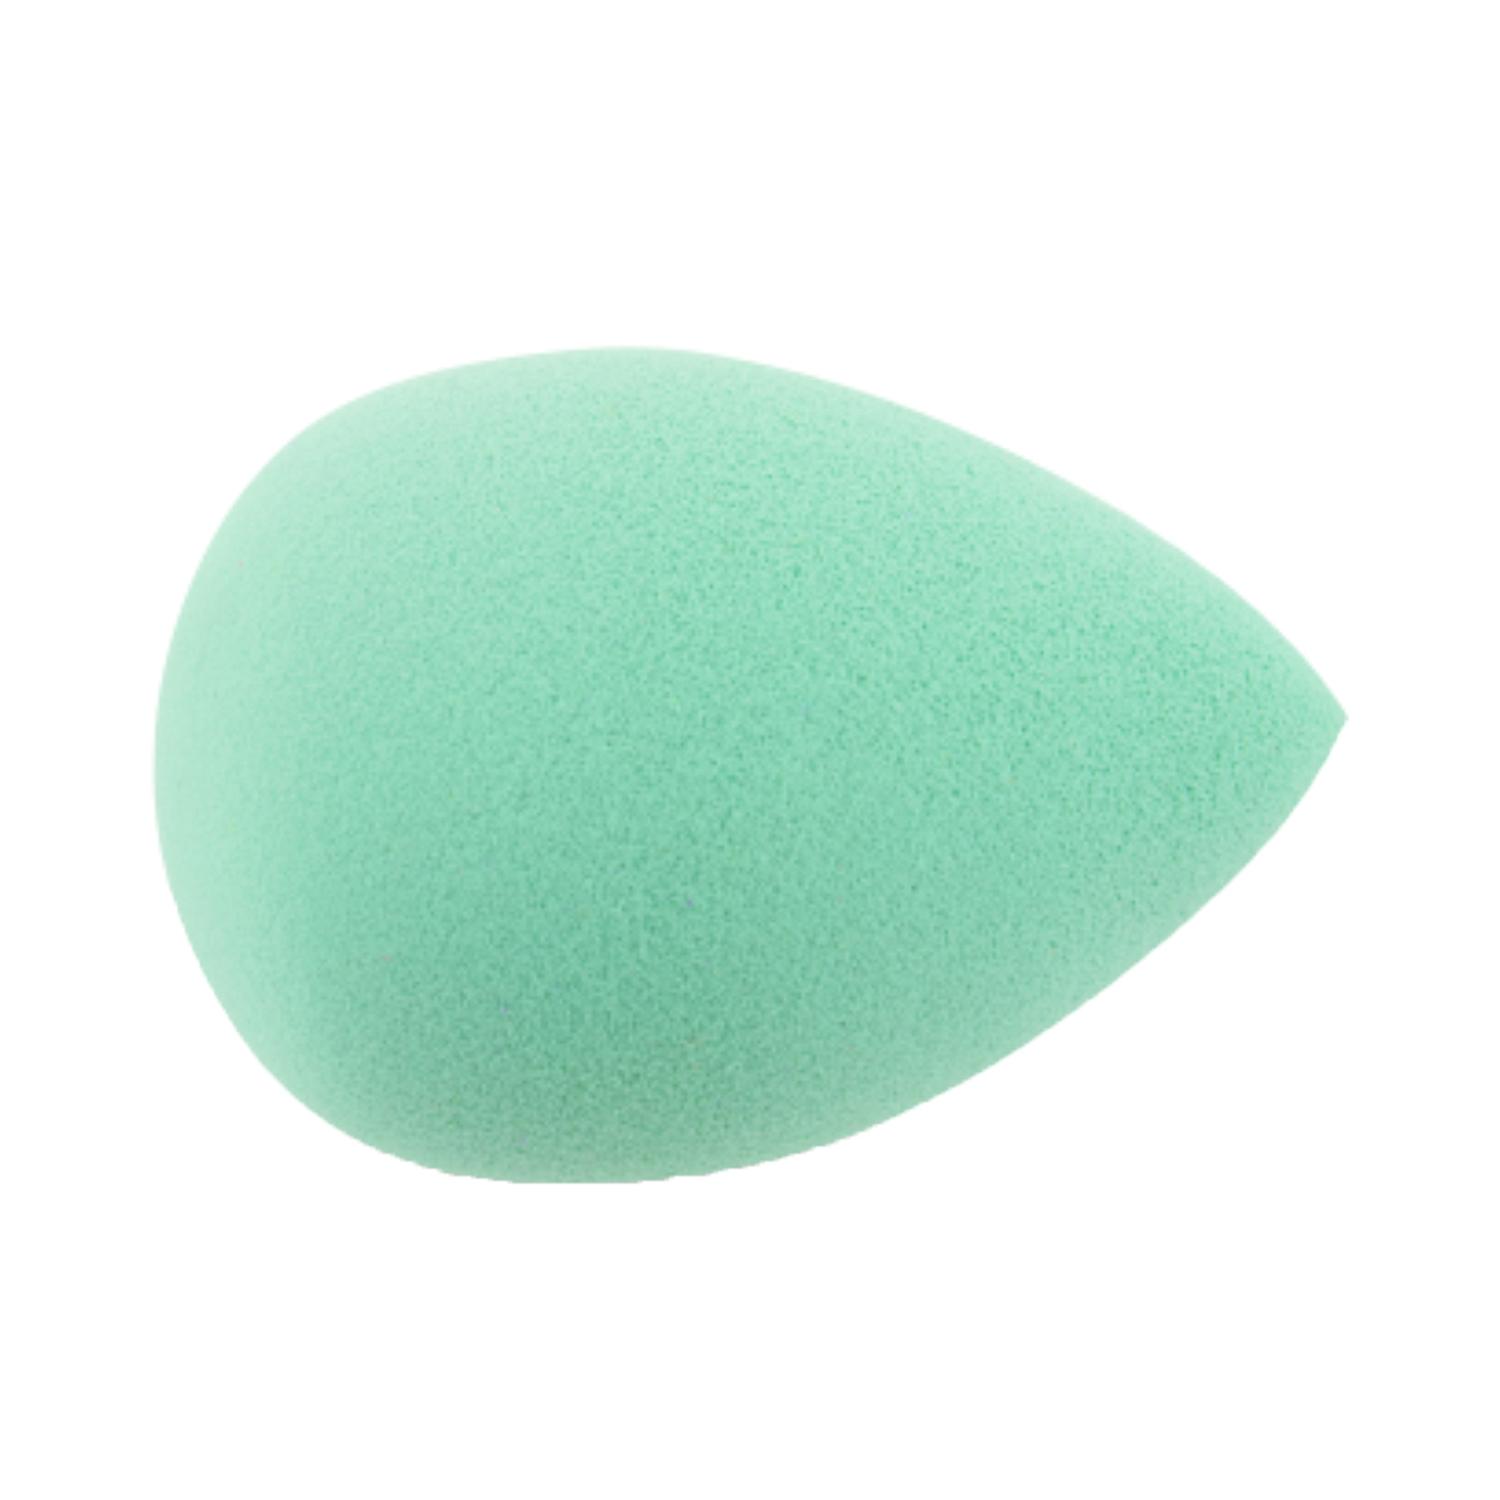 ofra perfecting puff (1 pc)